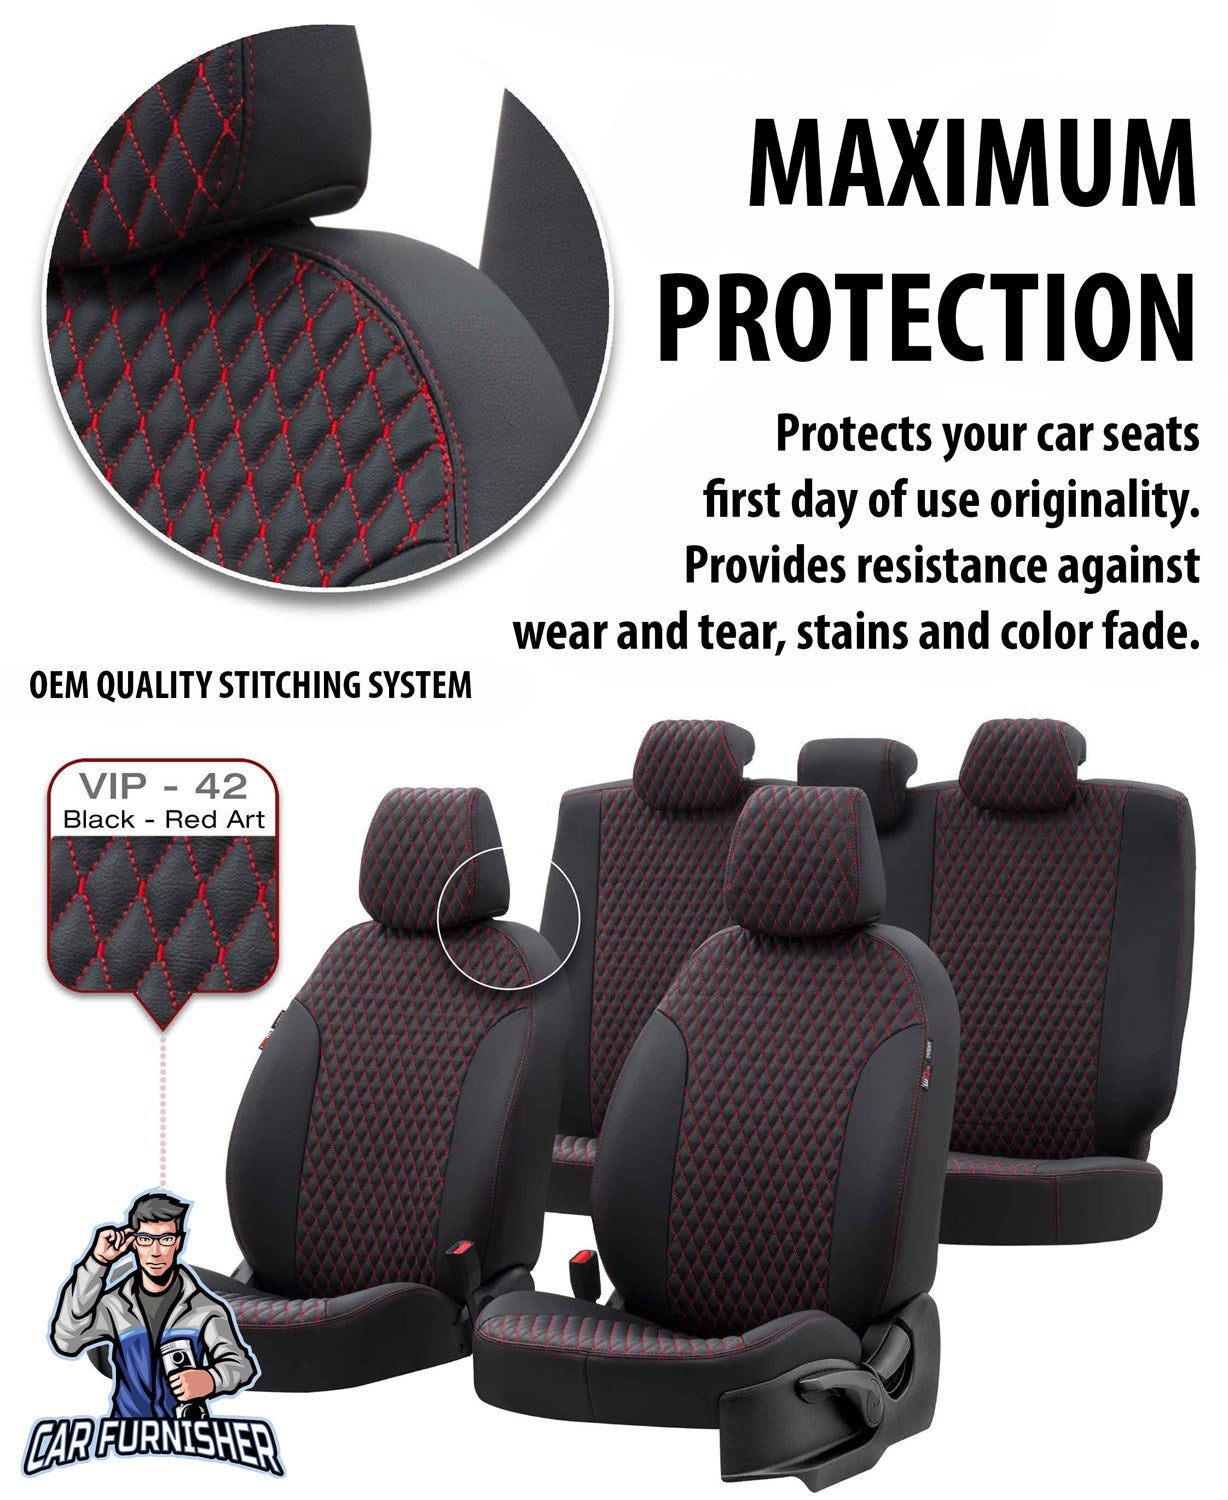 Ford S-Max Seat Covers Amsterdam Leather Design Smoked Black Leather